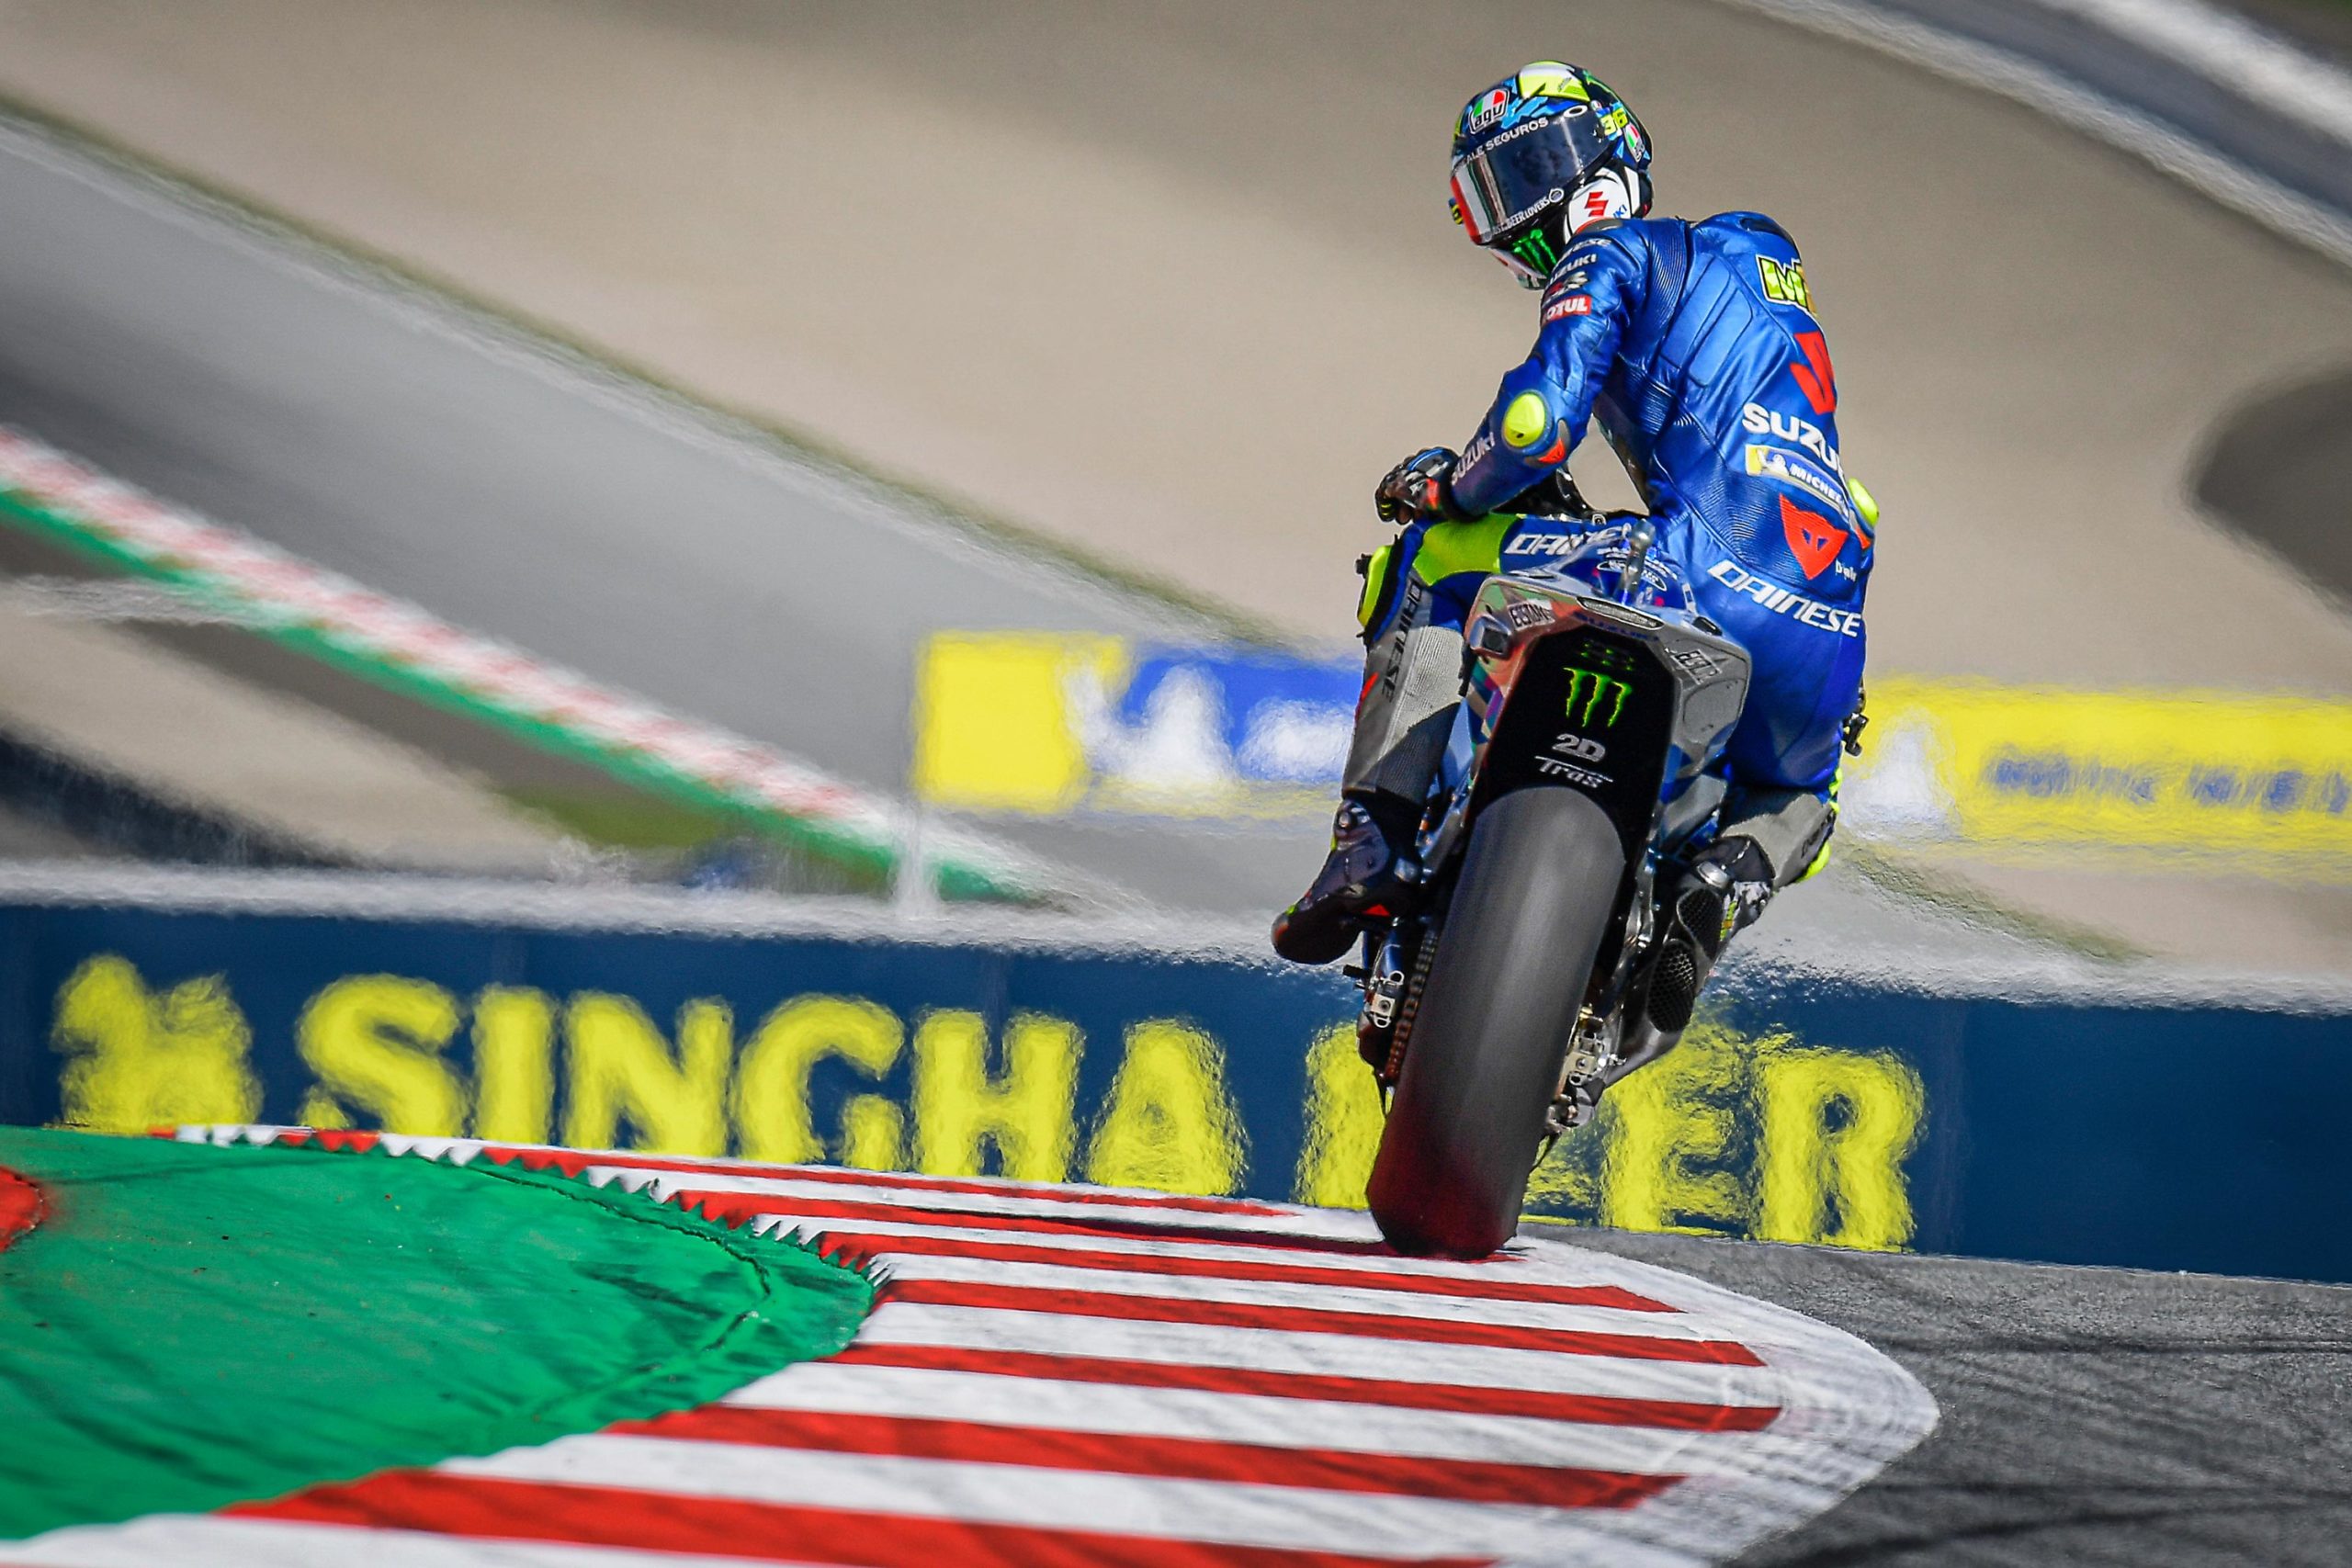 Friday MotoGP Summary at the Styria GP: A Wasted Day & Rubber